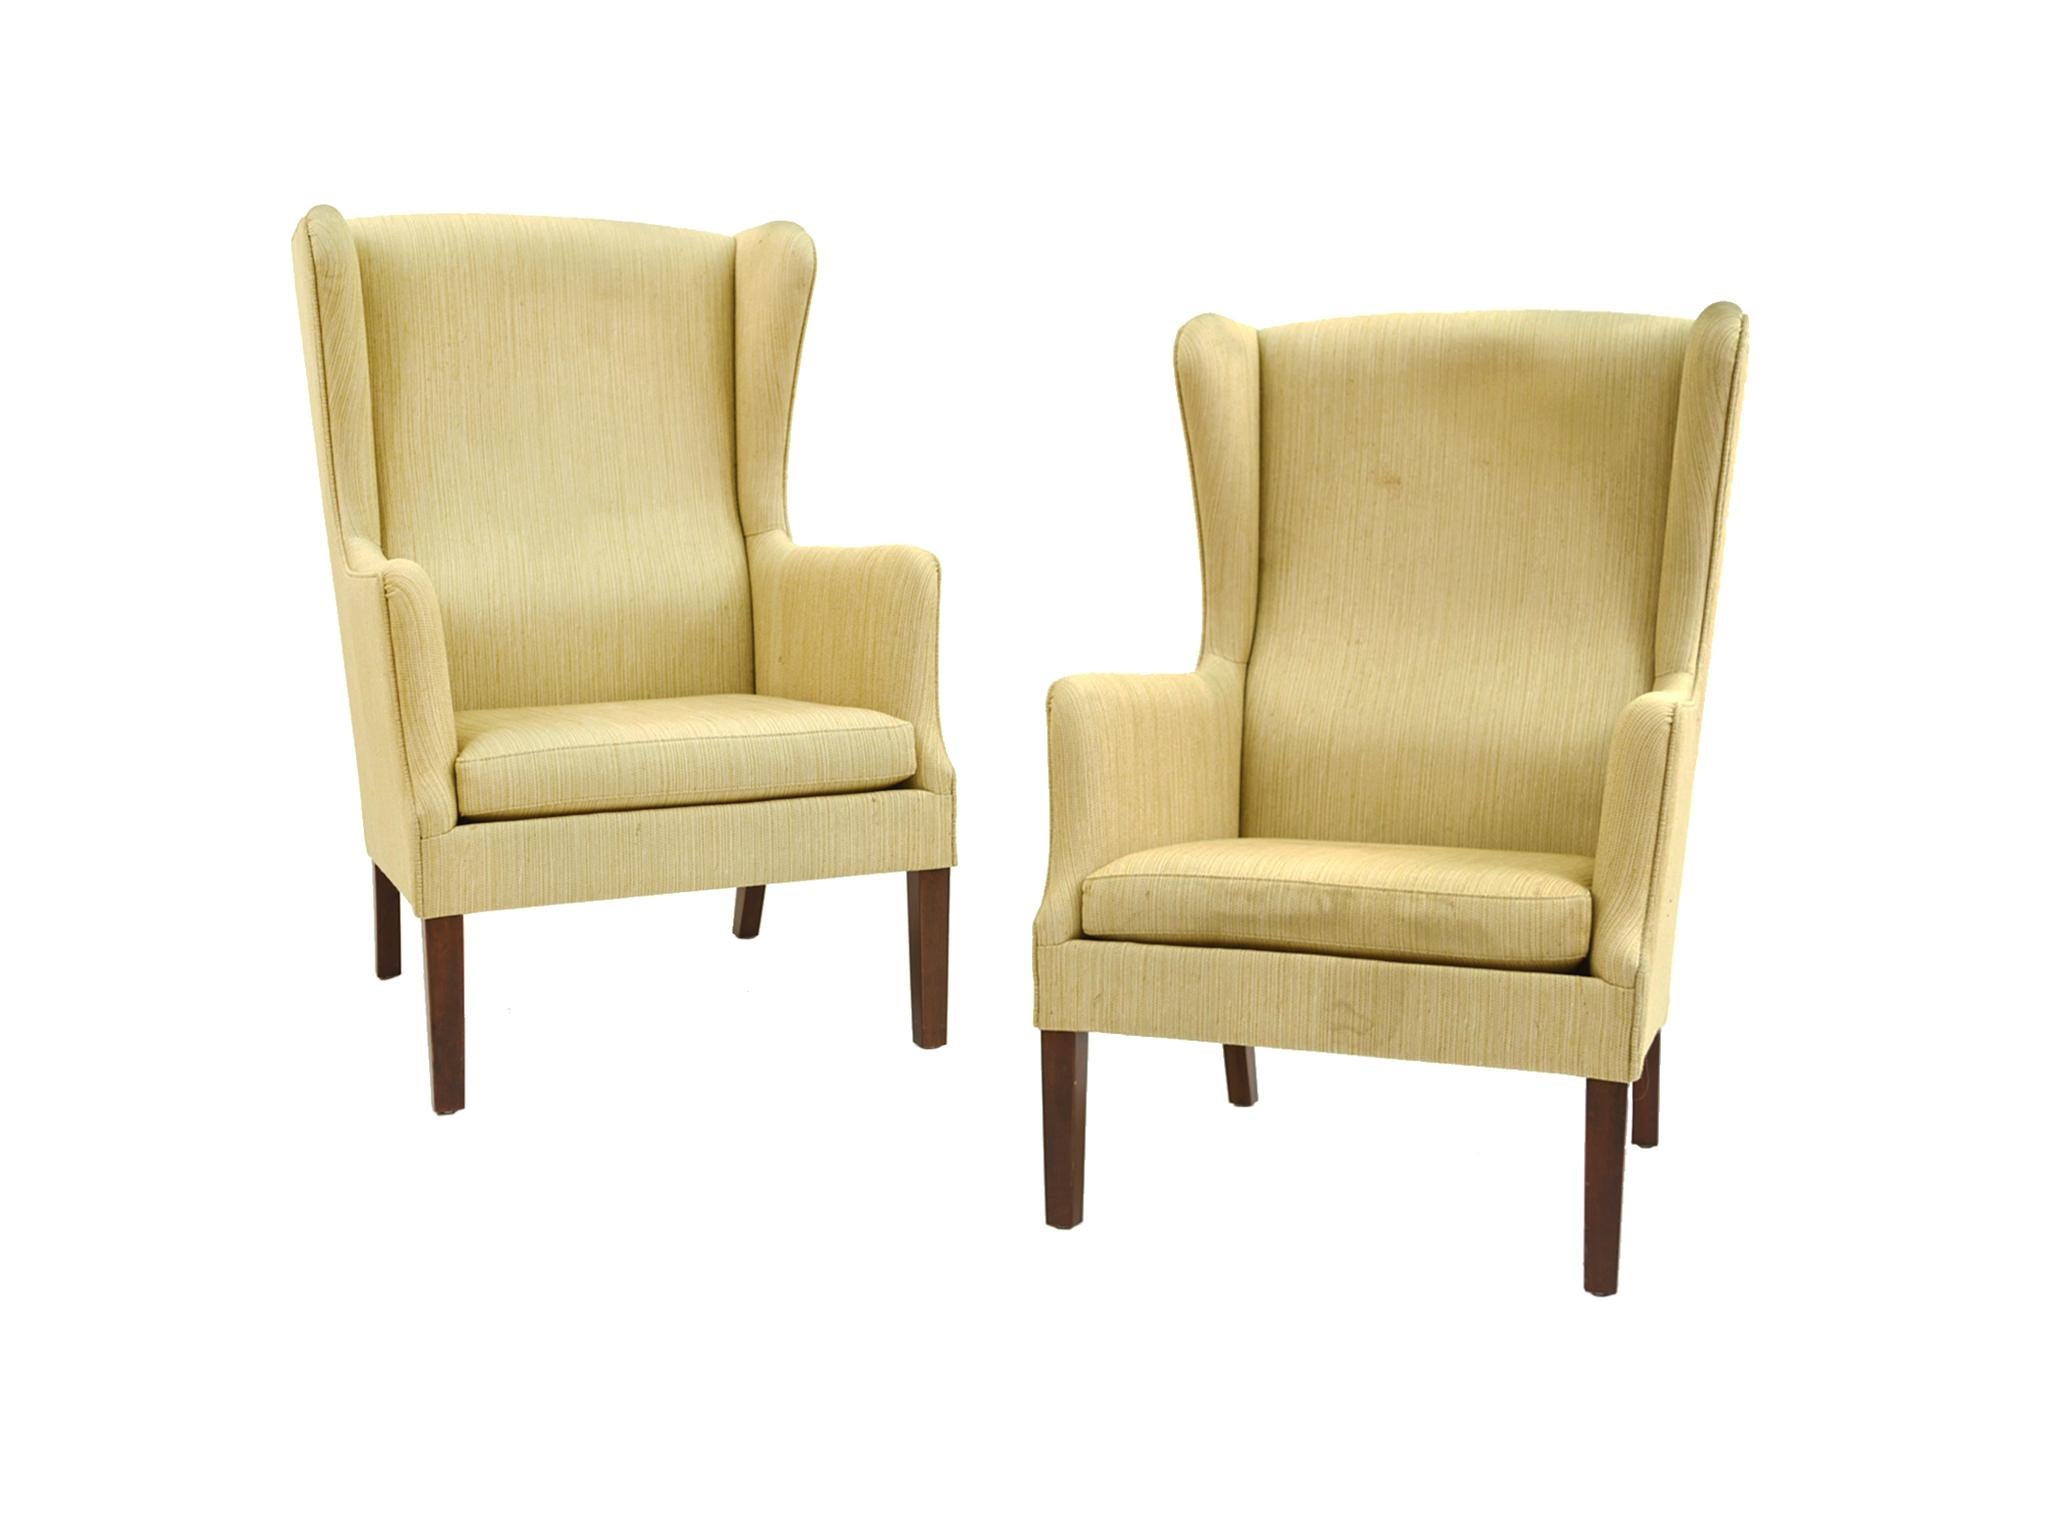 A pair of Classic wingback armchairs designed with a modern touch. Manufactured mid-20th century and attributed to Danish architect and designer Peter Hvidt. Clean, smooth lines and rounded edges characterize the chairs' elegant and warm design. The